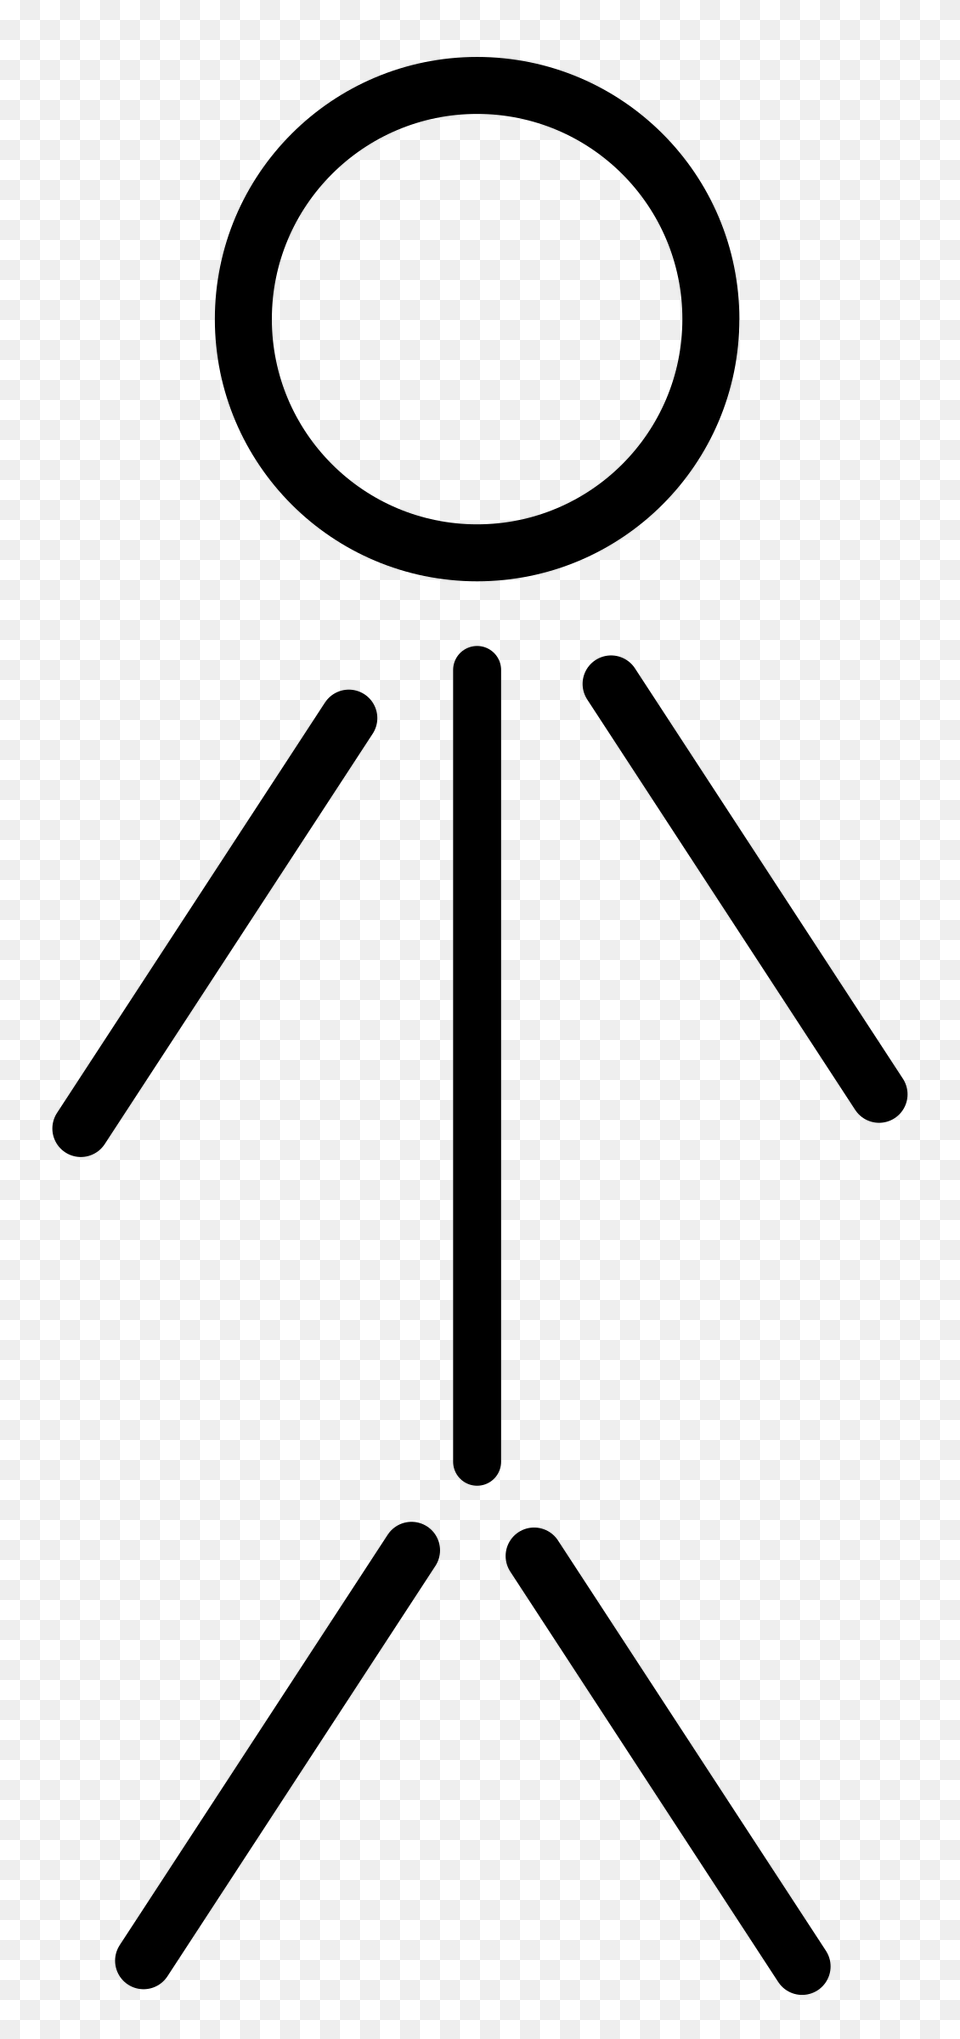 Simple Stick Figure Free Png